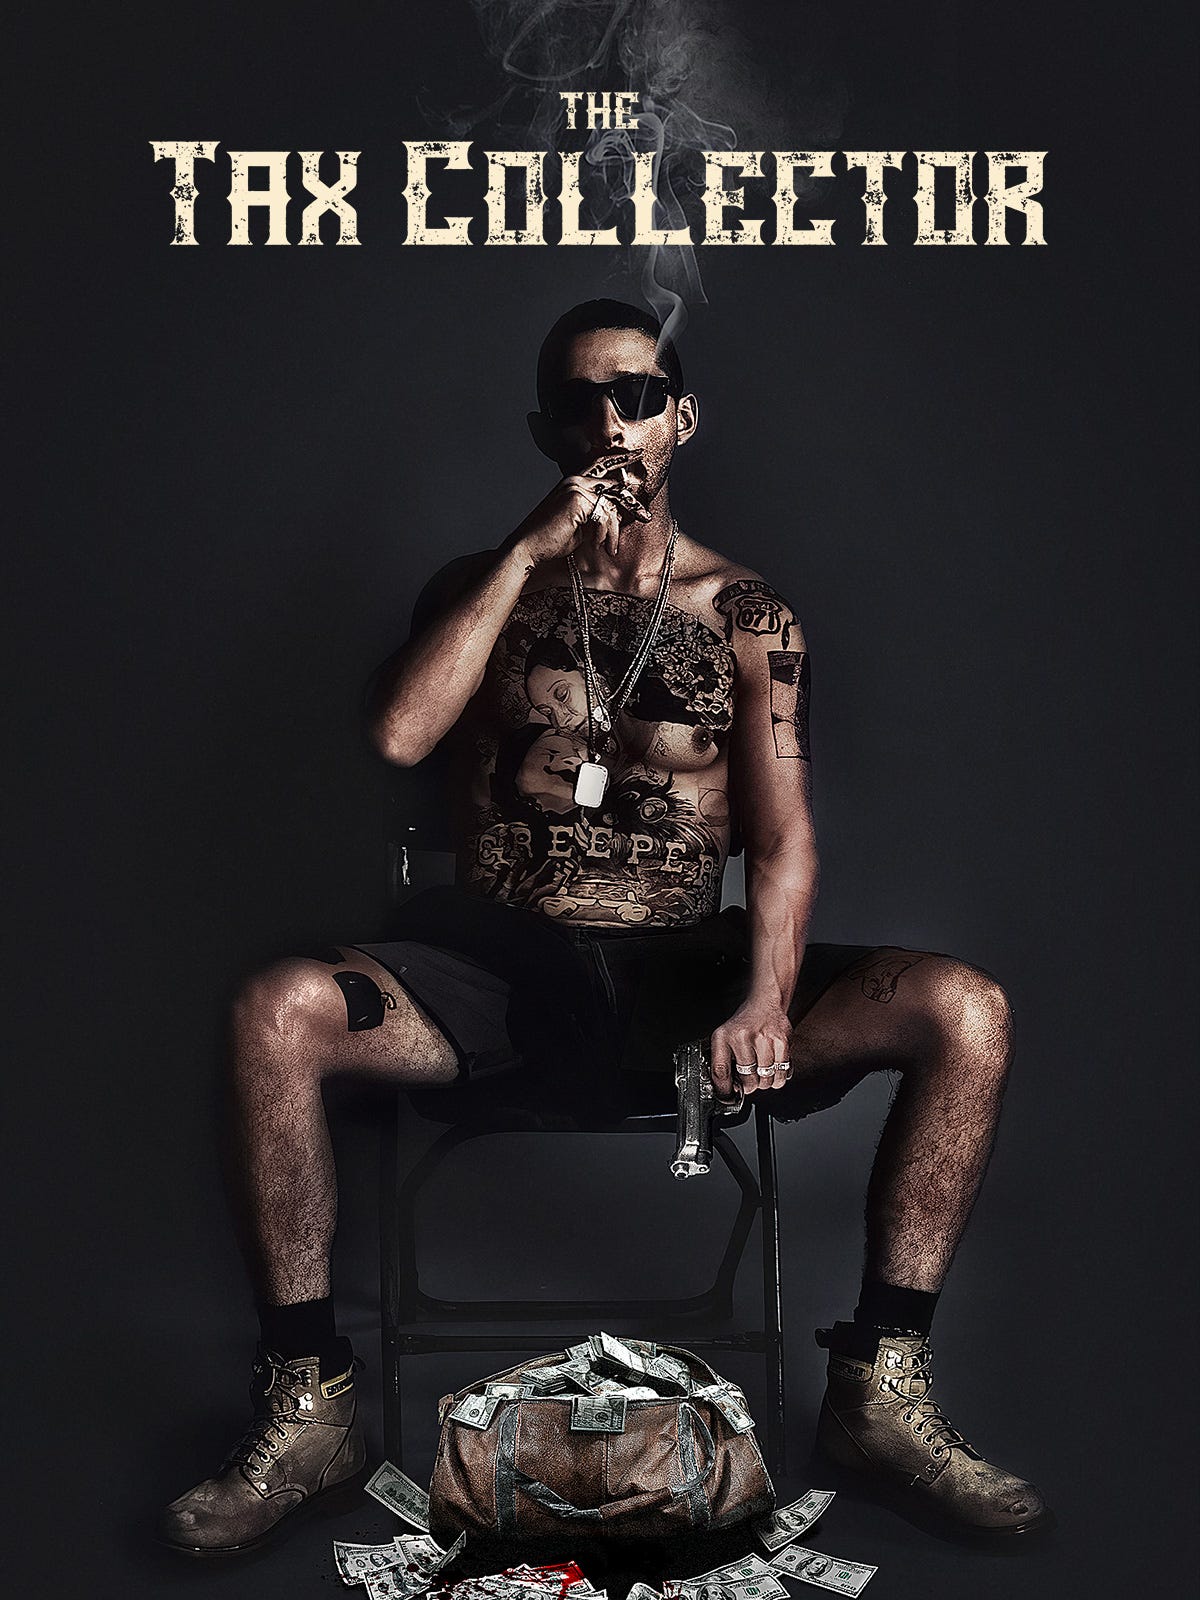 Prime Video: The Tax Collector